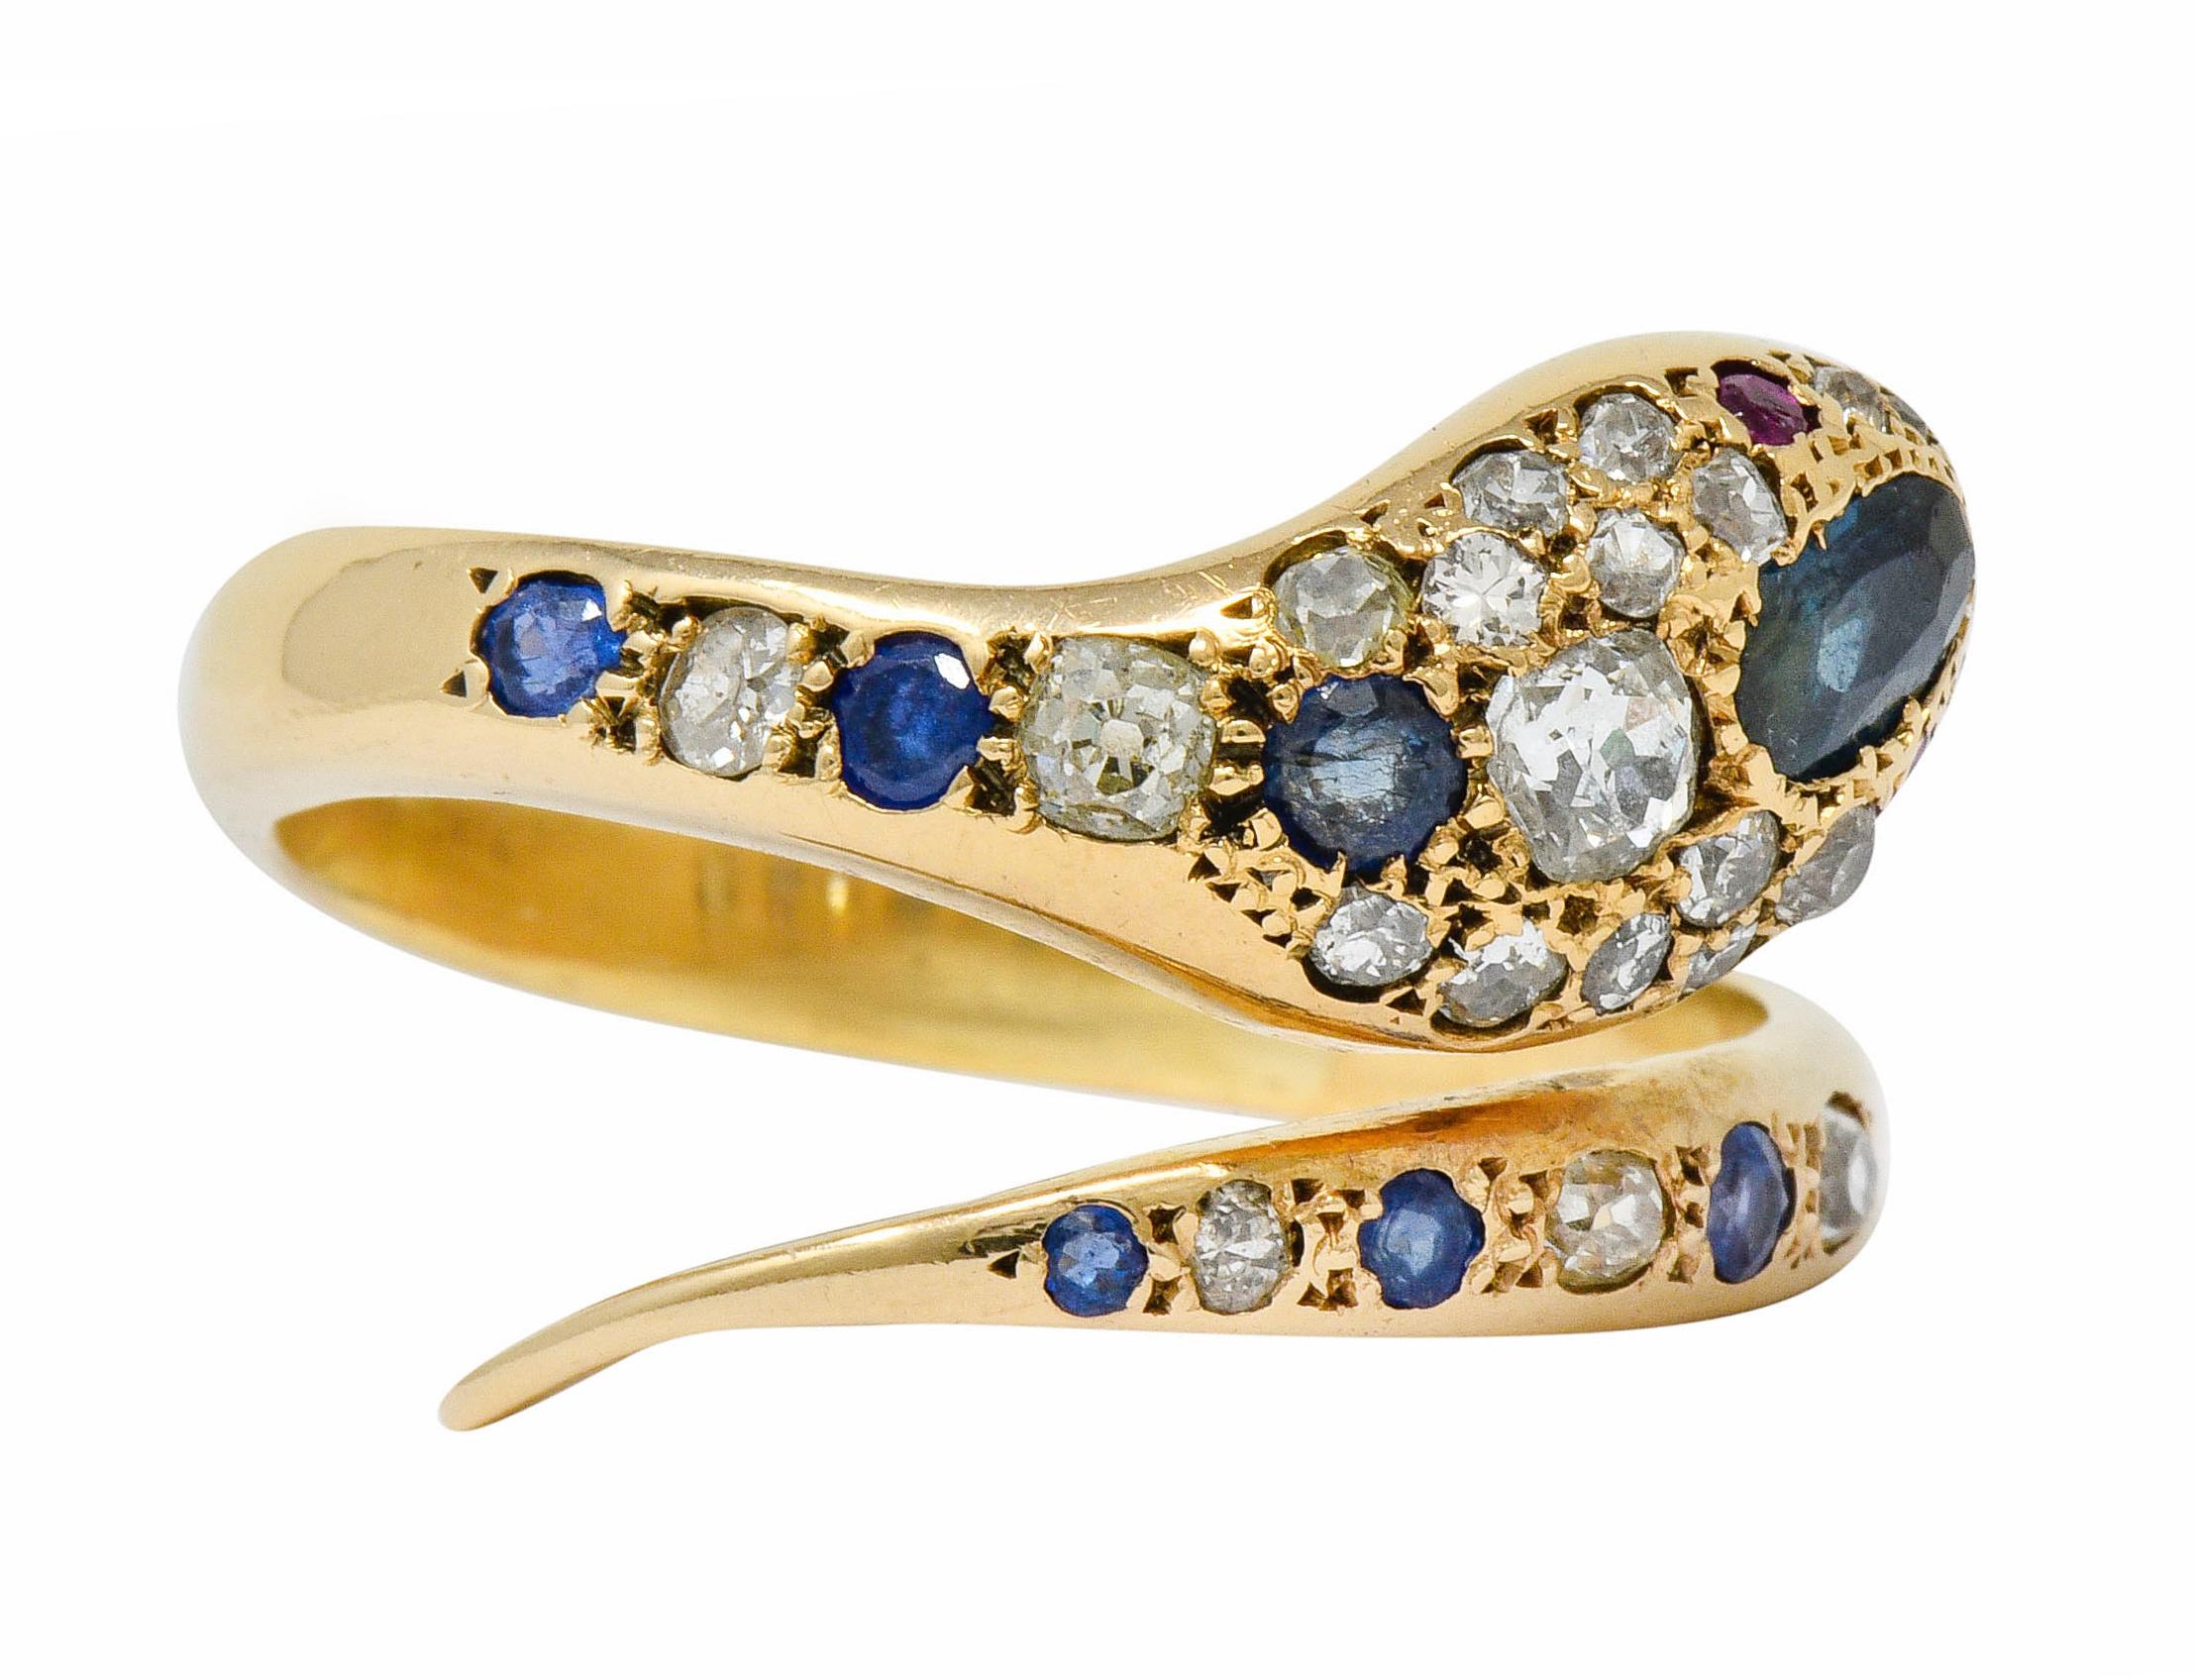 Bypass style ring designed as a coiling snake pavé set throughout by diamonds and sapphires

Sapphires are greenish-blue to royal blue in color, cushion and oval cut, weighing in total approximately 1.25 carats

Old mine cut diamonds weigh in total